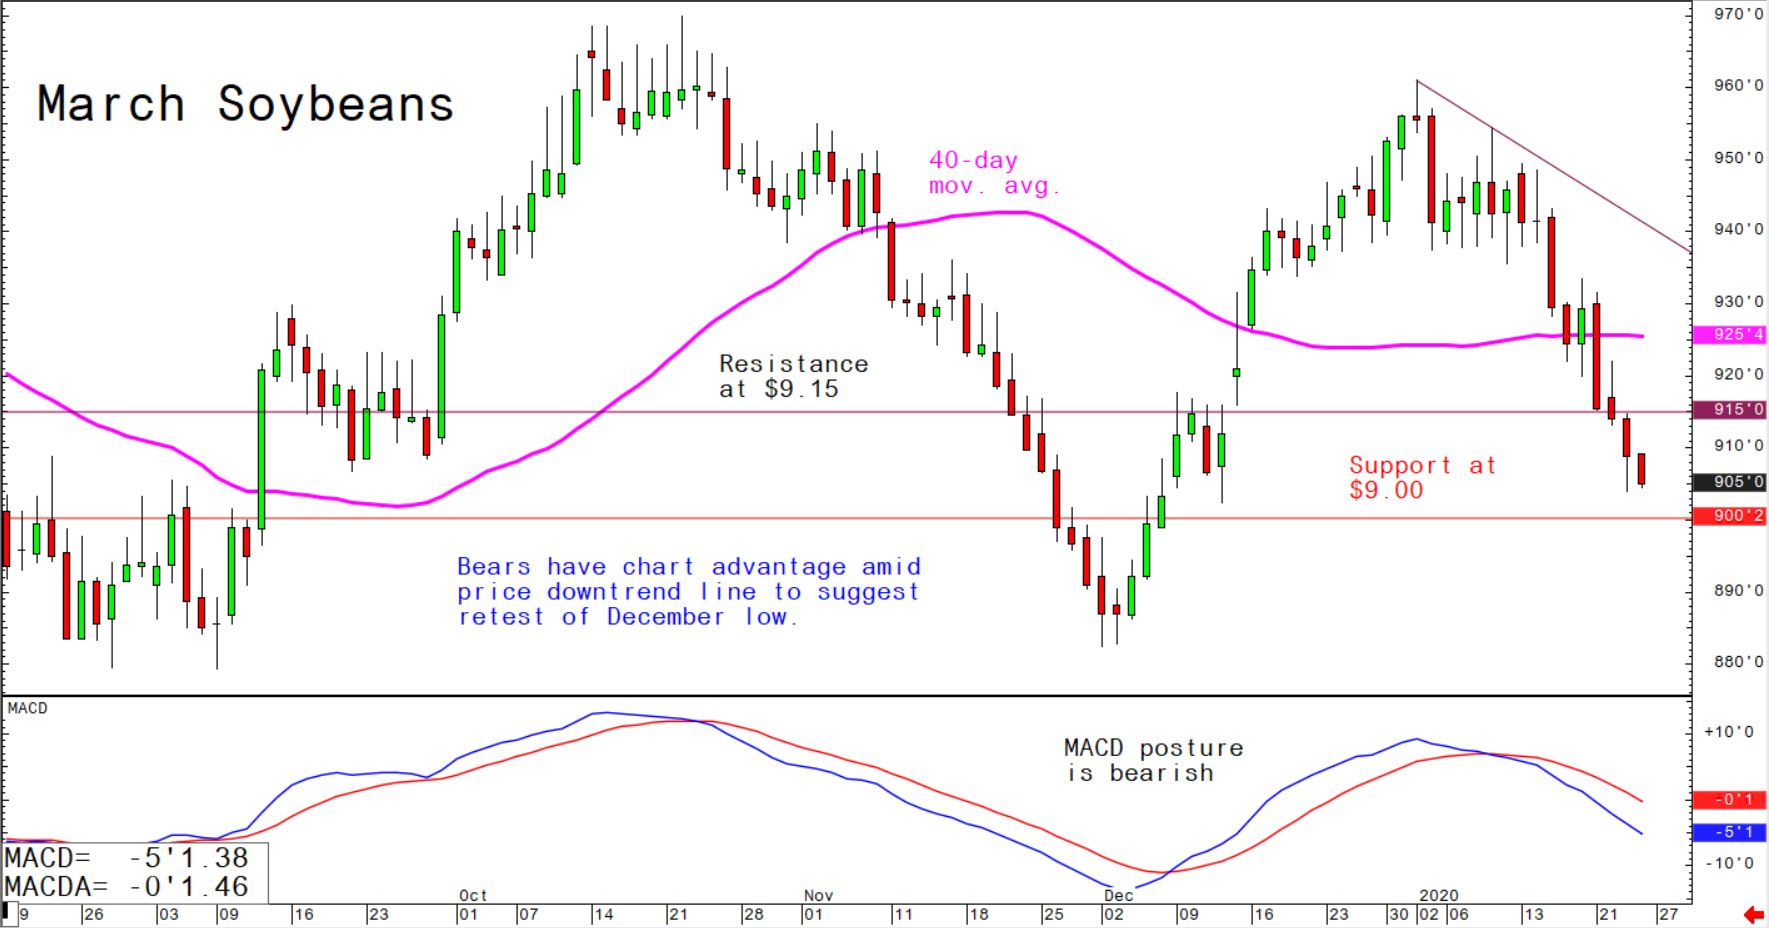 Bears have chart advantage amid price downtrend line to suggest retest of December low